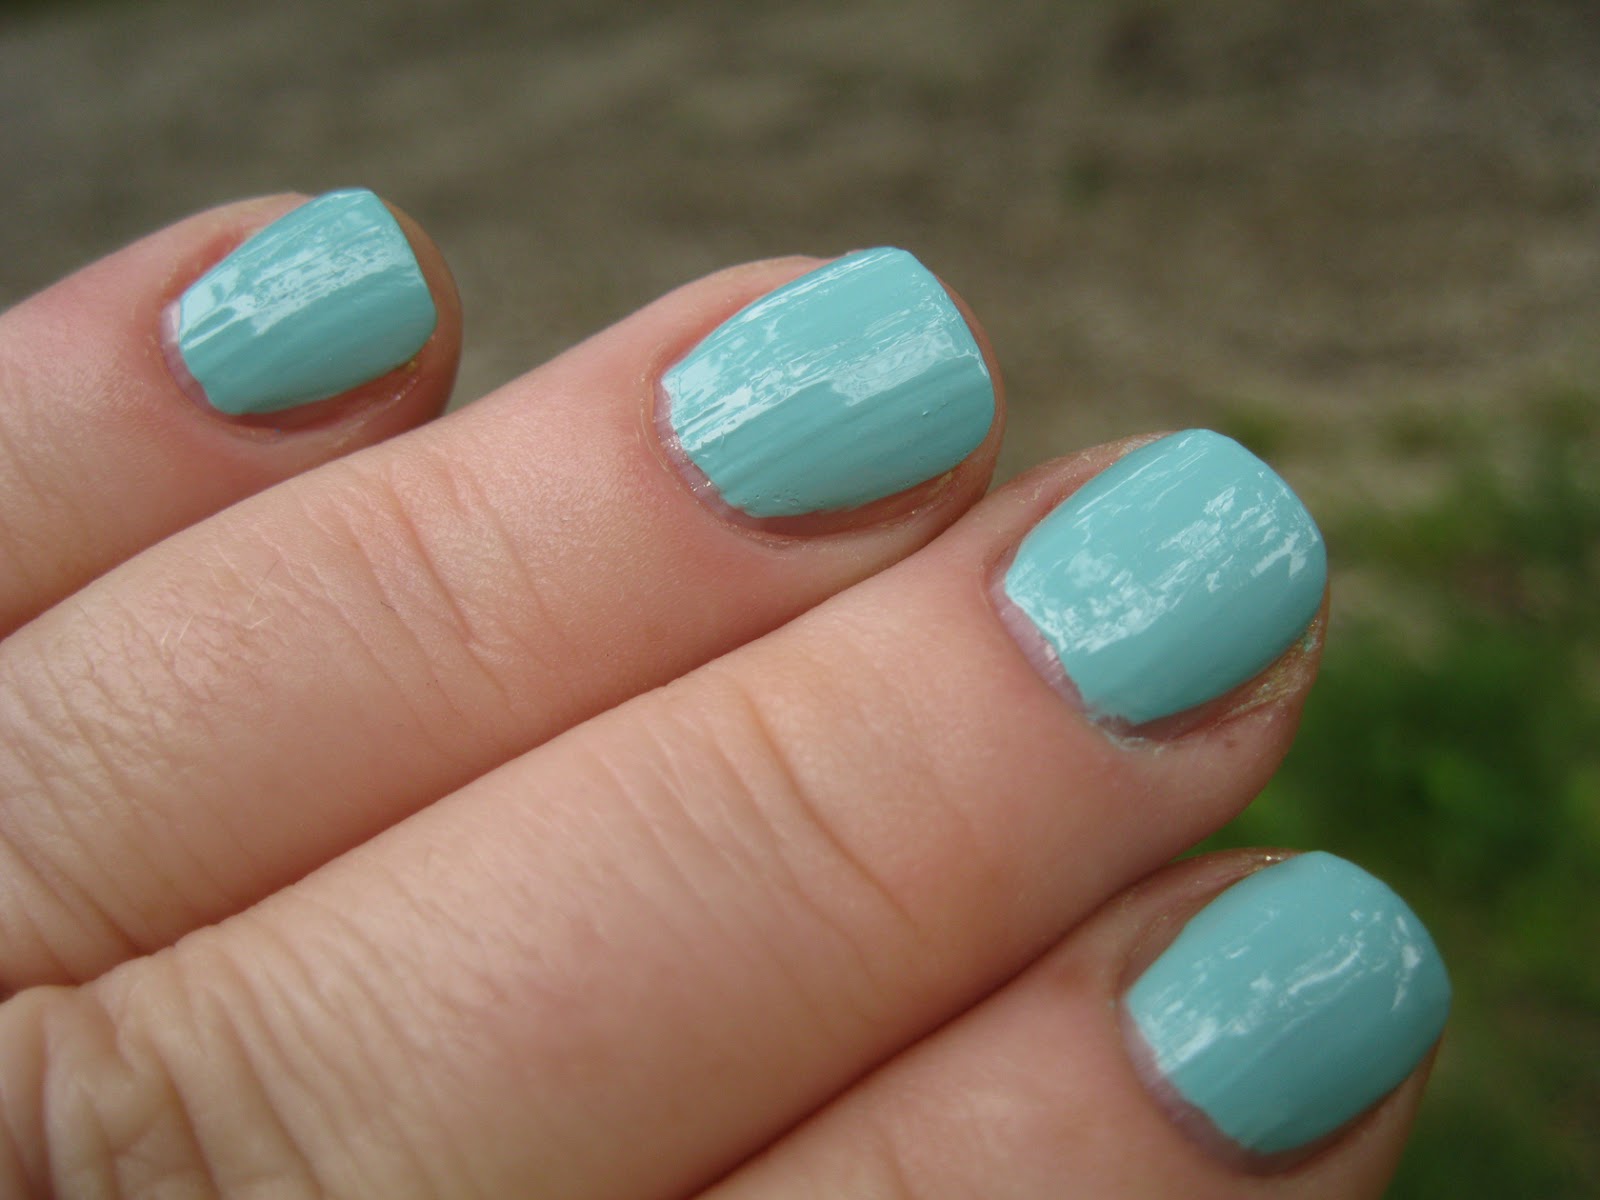 10. Orly Nail Lacquer in "Gumdrop" - wide 8